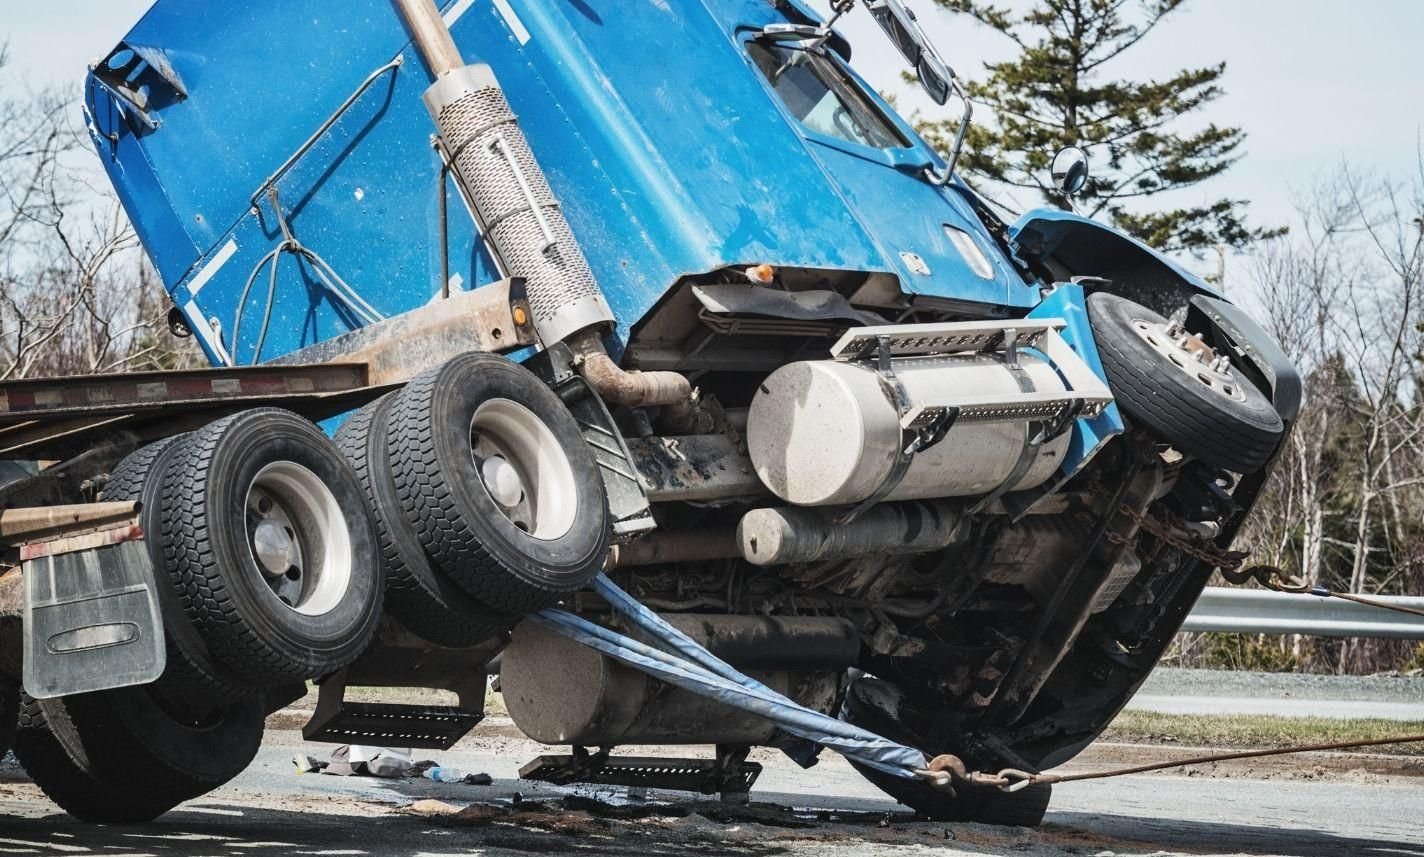 blackshear-commercial-truck-accident-injury-lawyer